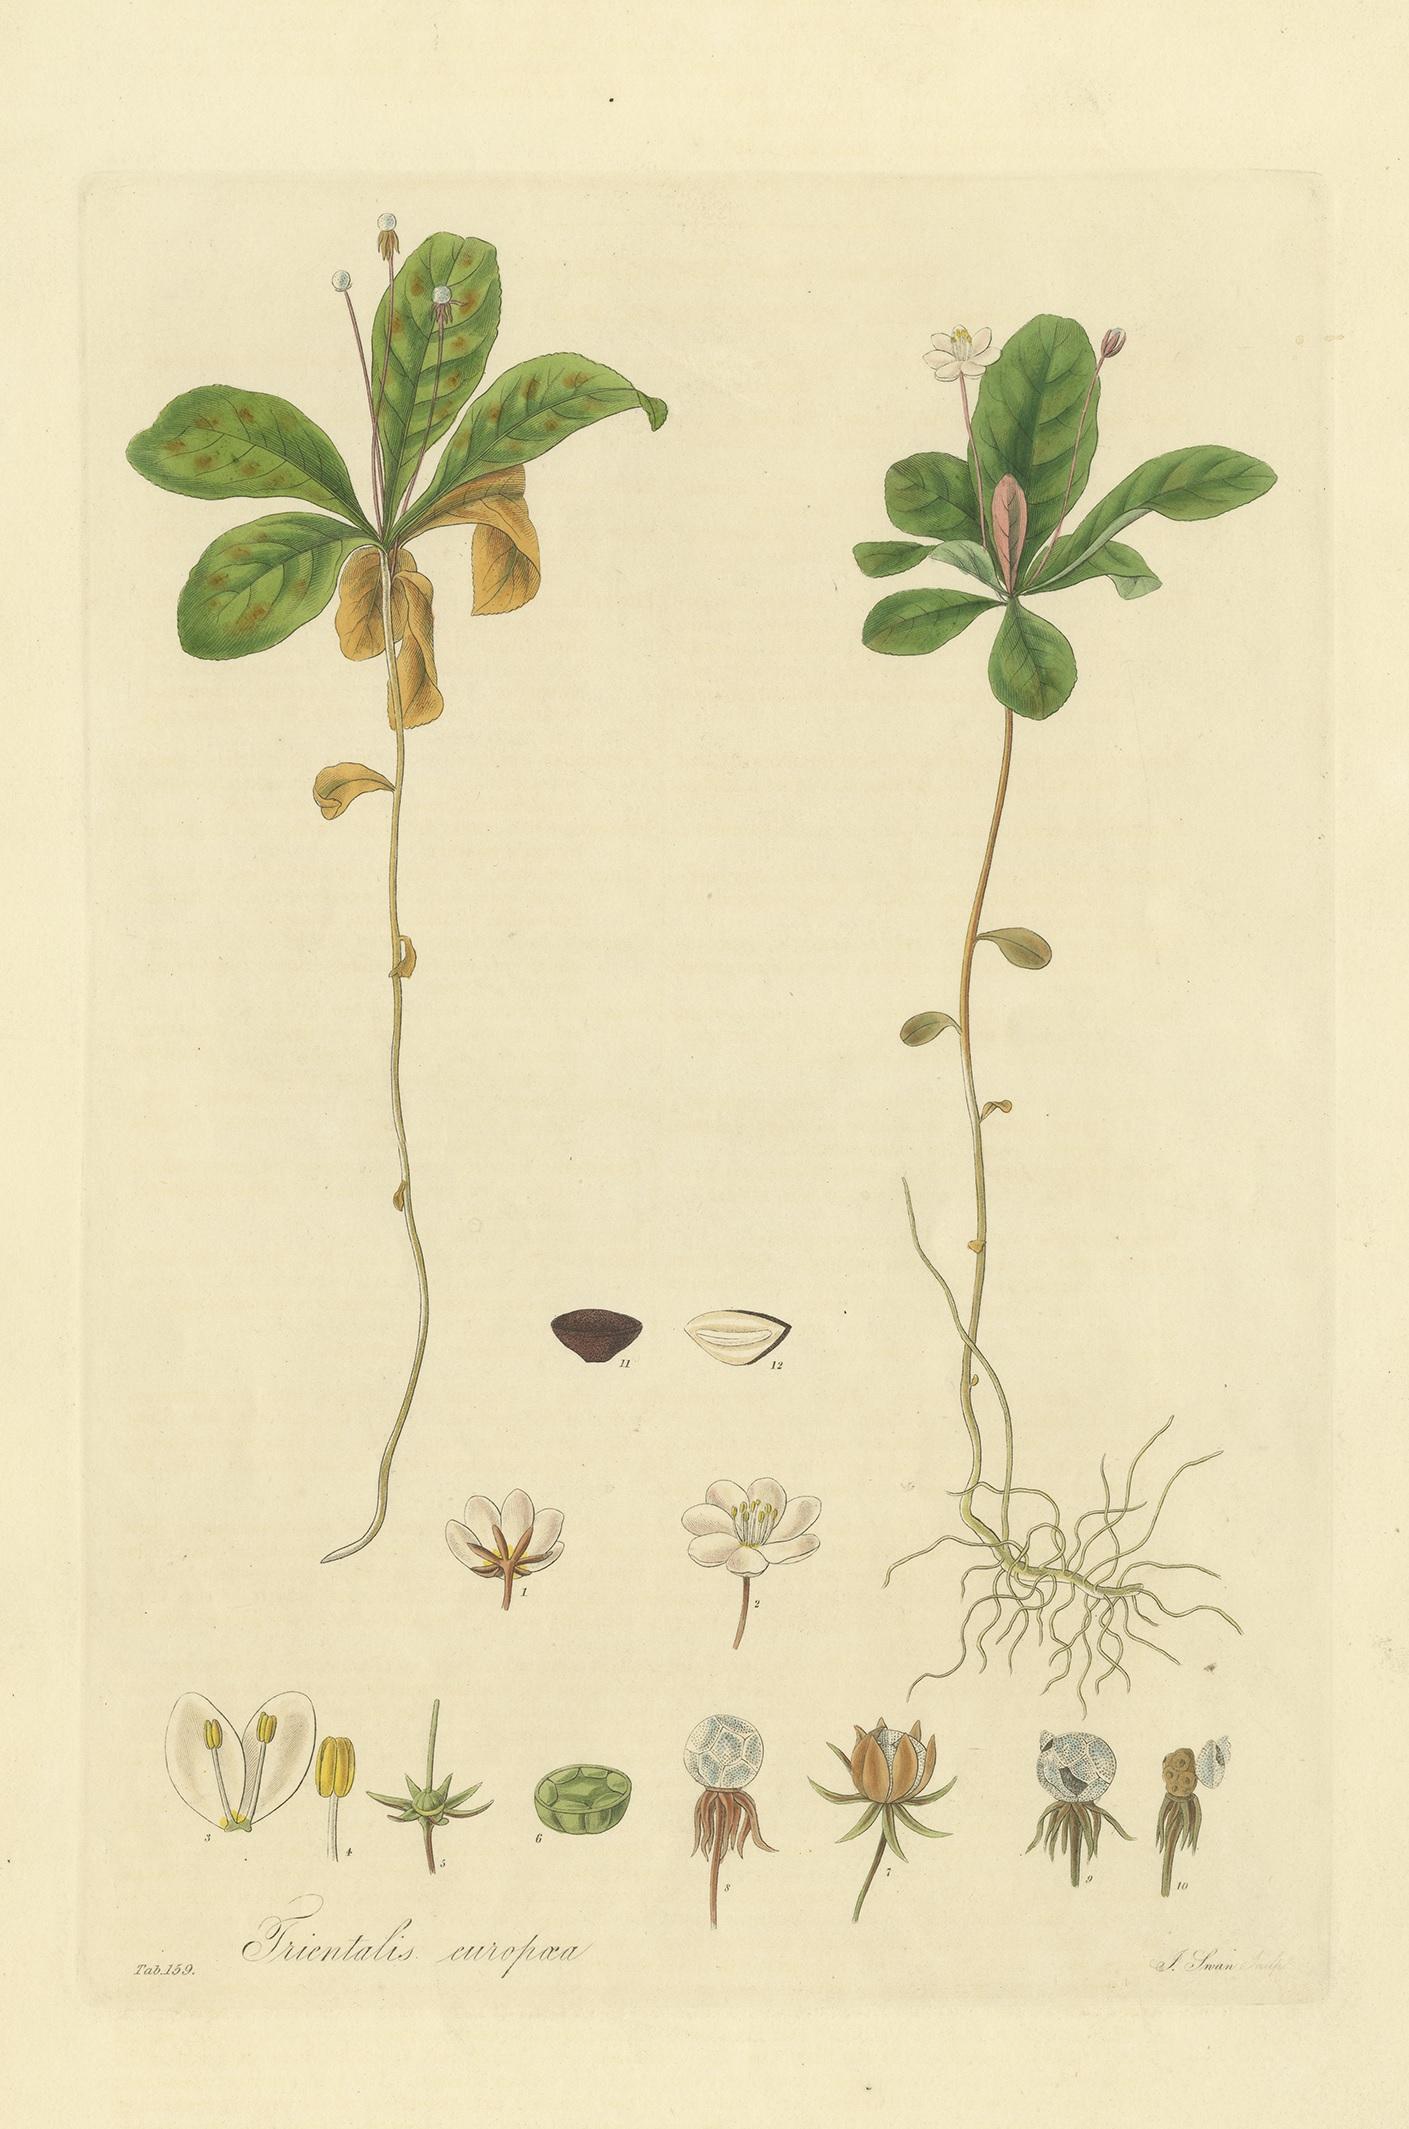 Antique botany print titled 'Trientalis Europaea'. Hand colored engraving of trientalis europaea, also known as chickweed-wintergreen or arctic starflower. This print originates from 'Flora Londinensis' by William Curtis.